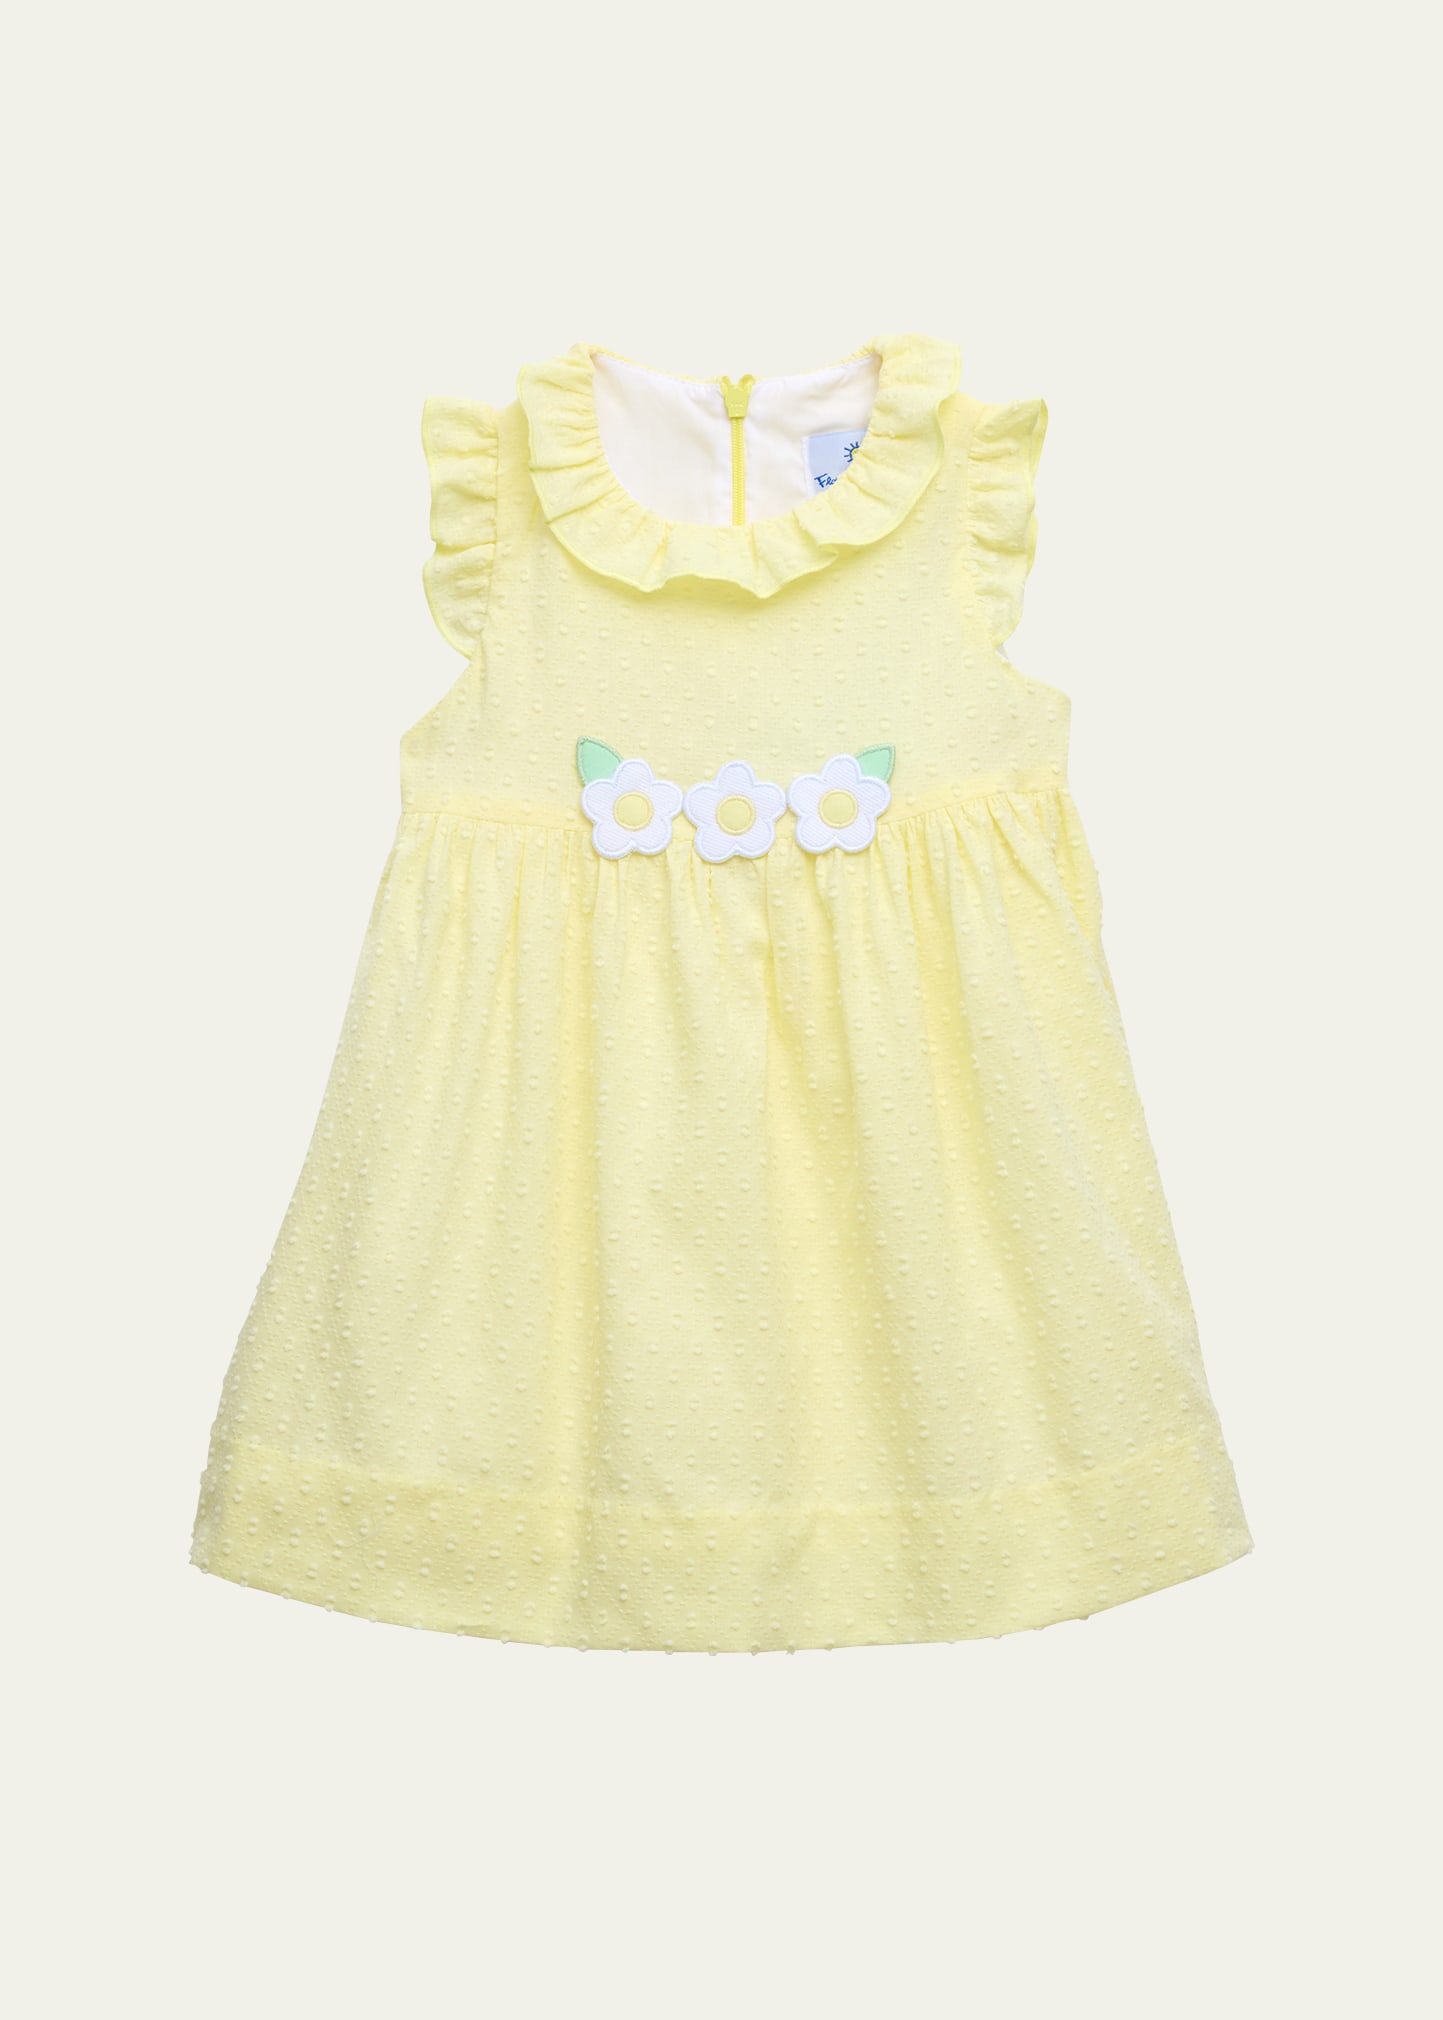 Girl's Yellow Dress with Flowers